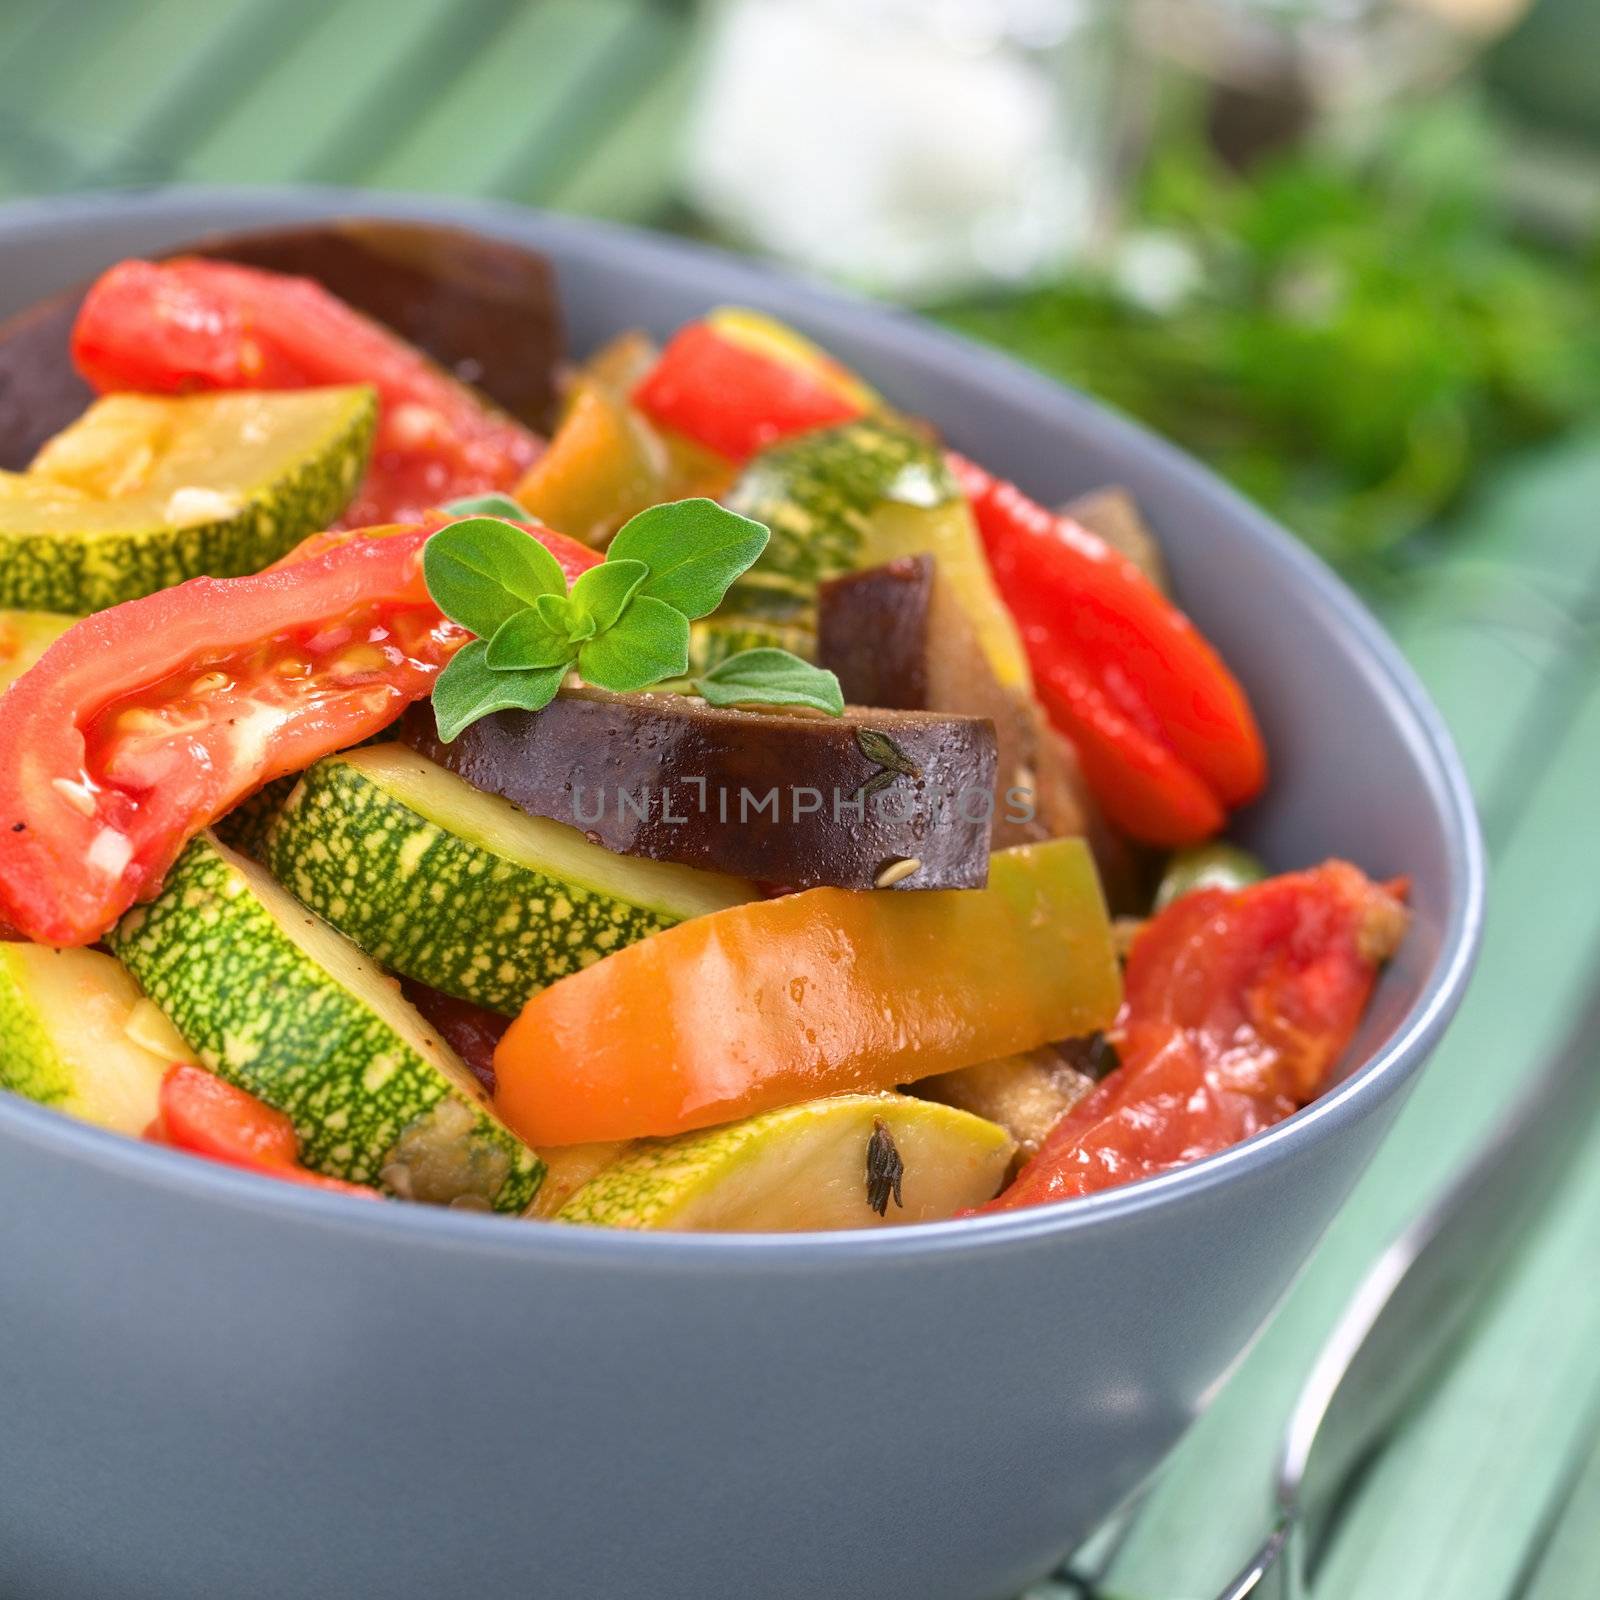 Bowl of fresh homemade Ratatouille made of eggplant, zucchini, bell pepper and tomato and seasoned with herbs (garlic, thyme, oregano), garnished with fresh oregano (Selective Focus, Focus on the oregano leaves on the meal)